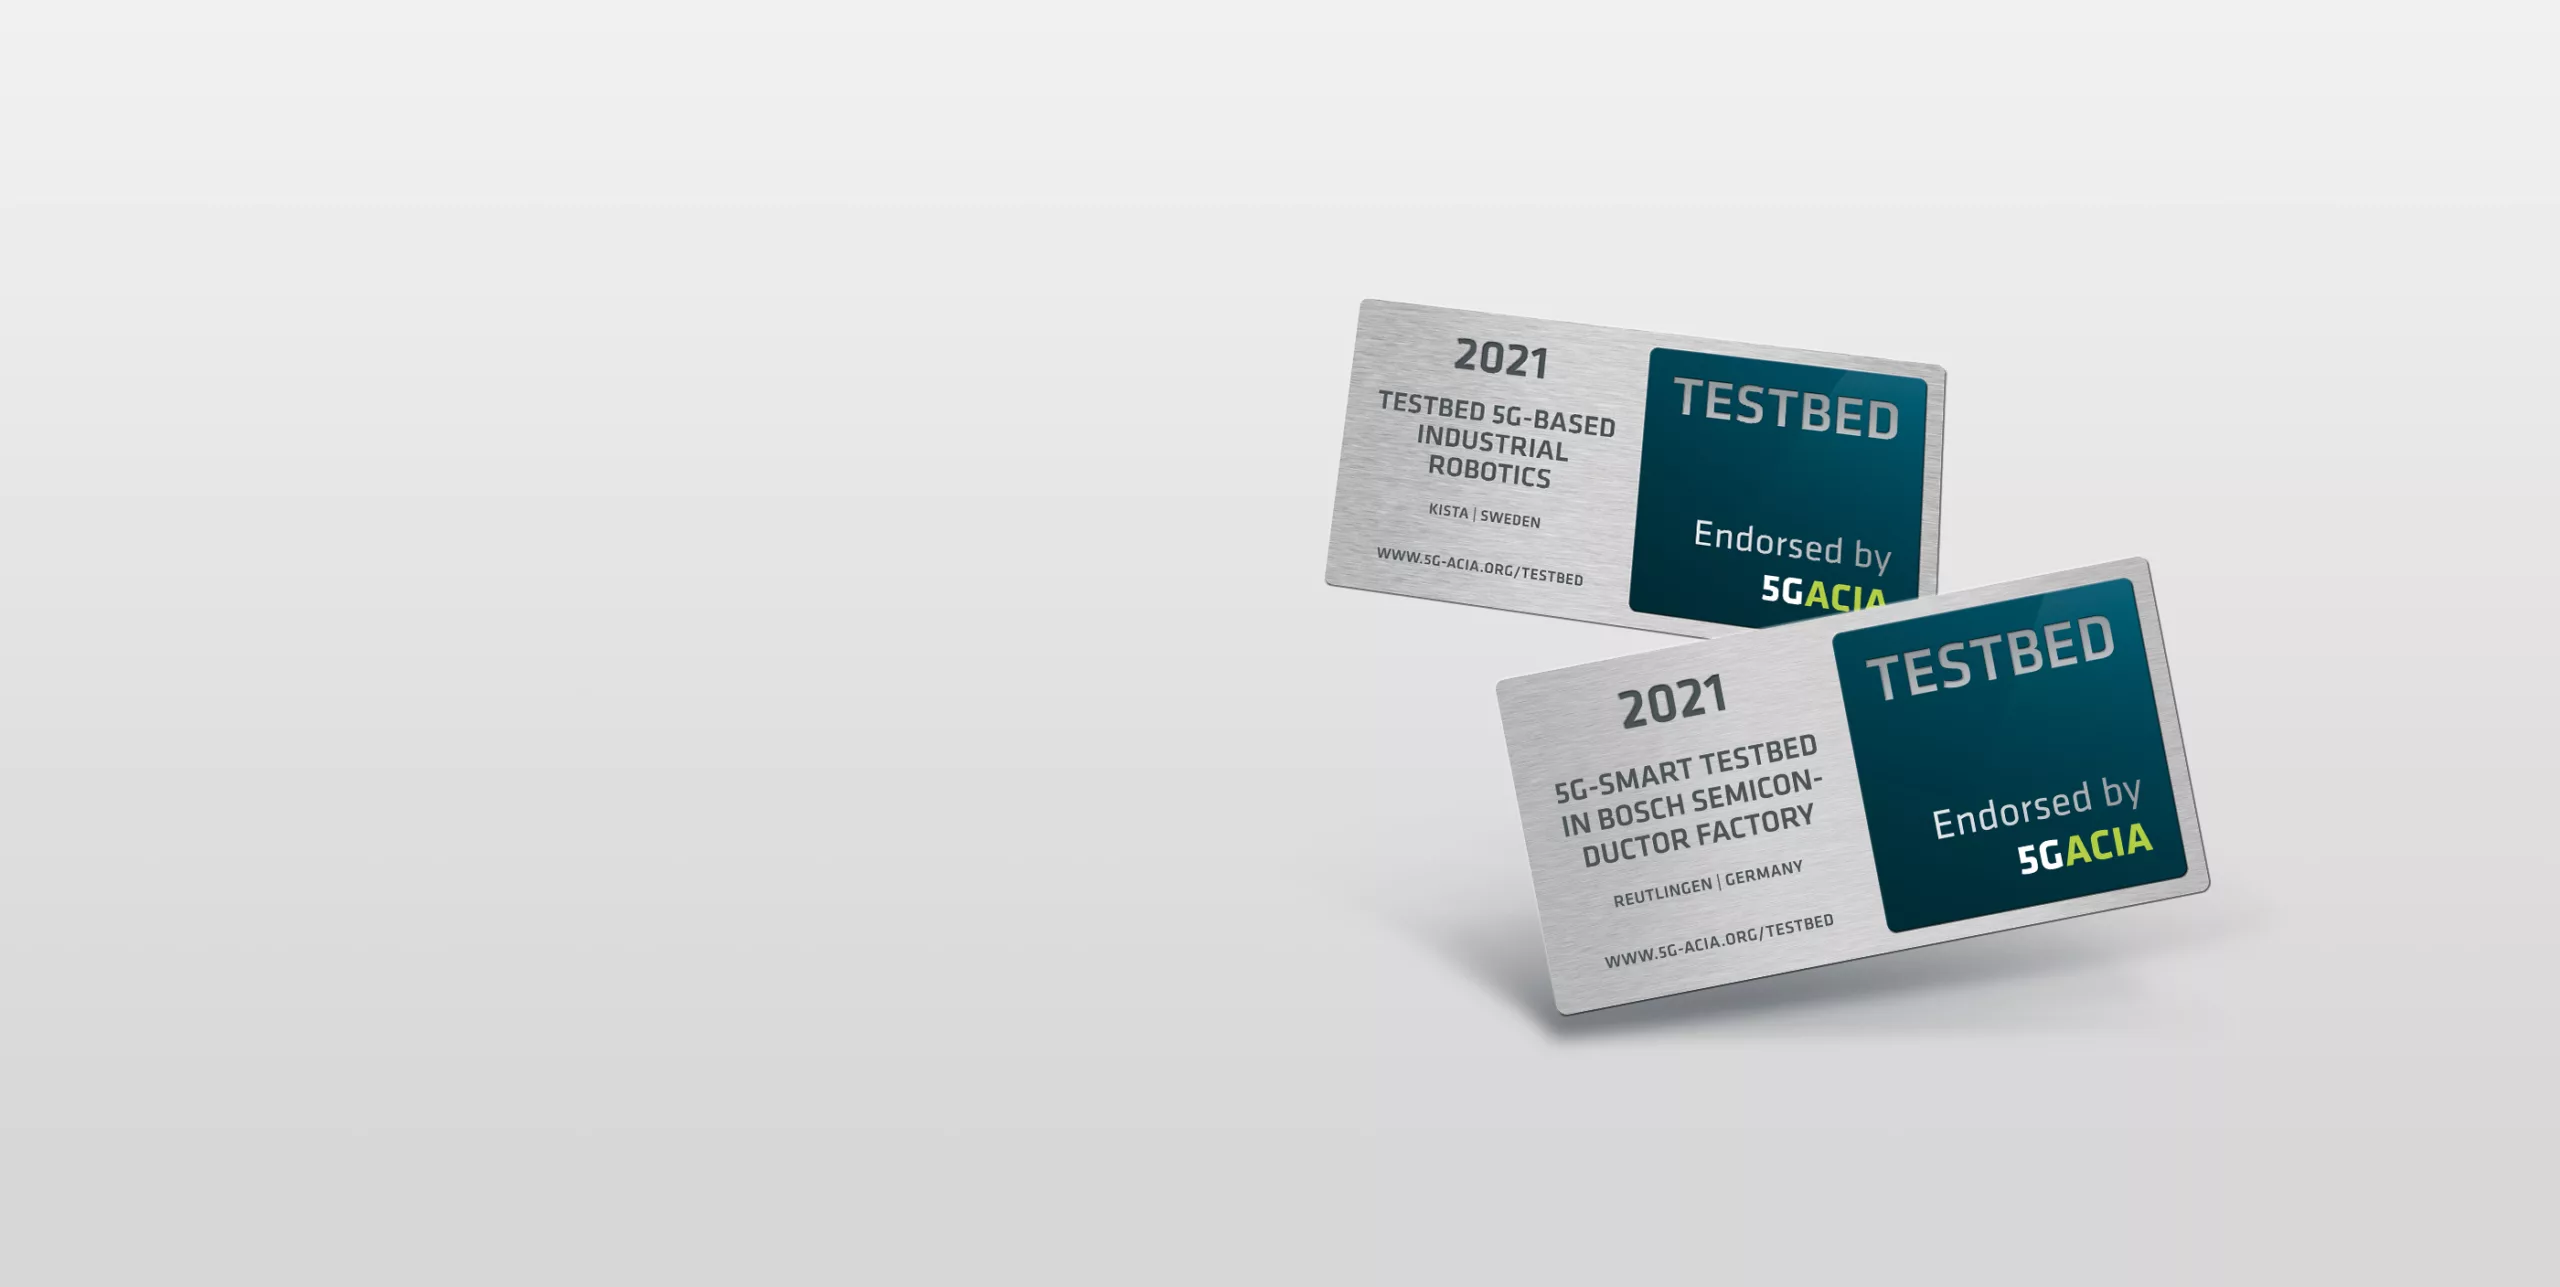 5G-ACIA-Testbed-Labels-Graphic-silver